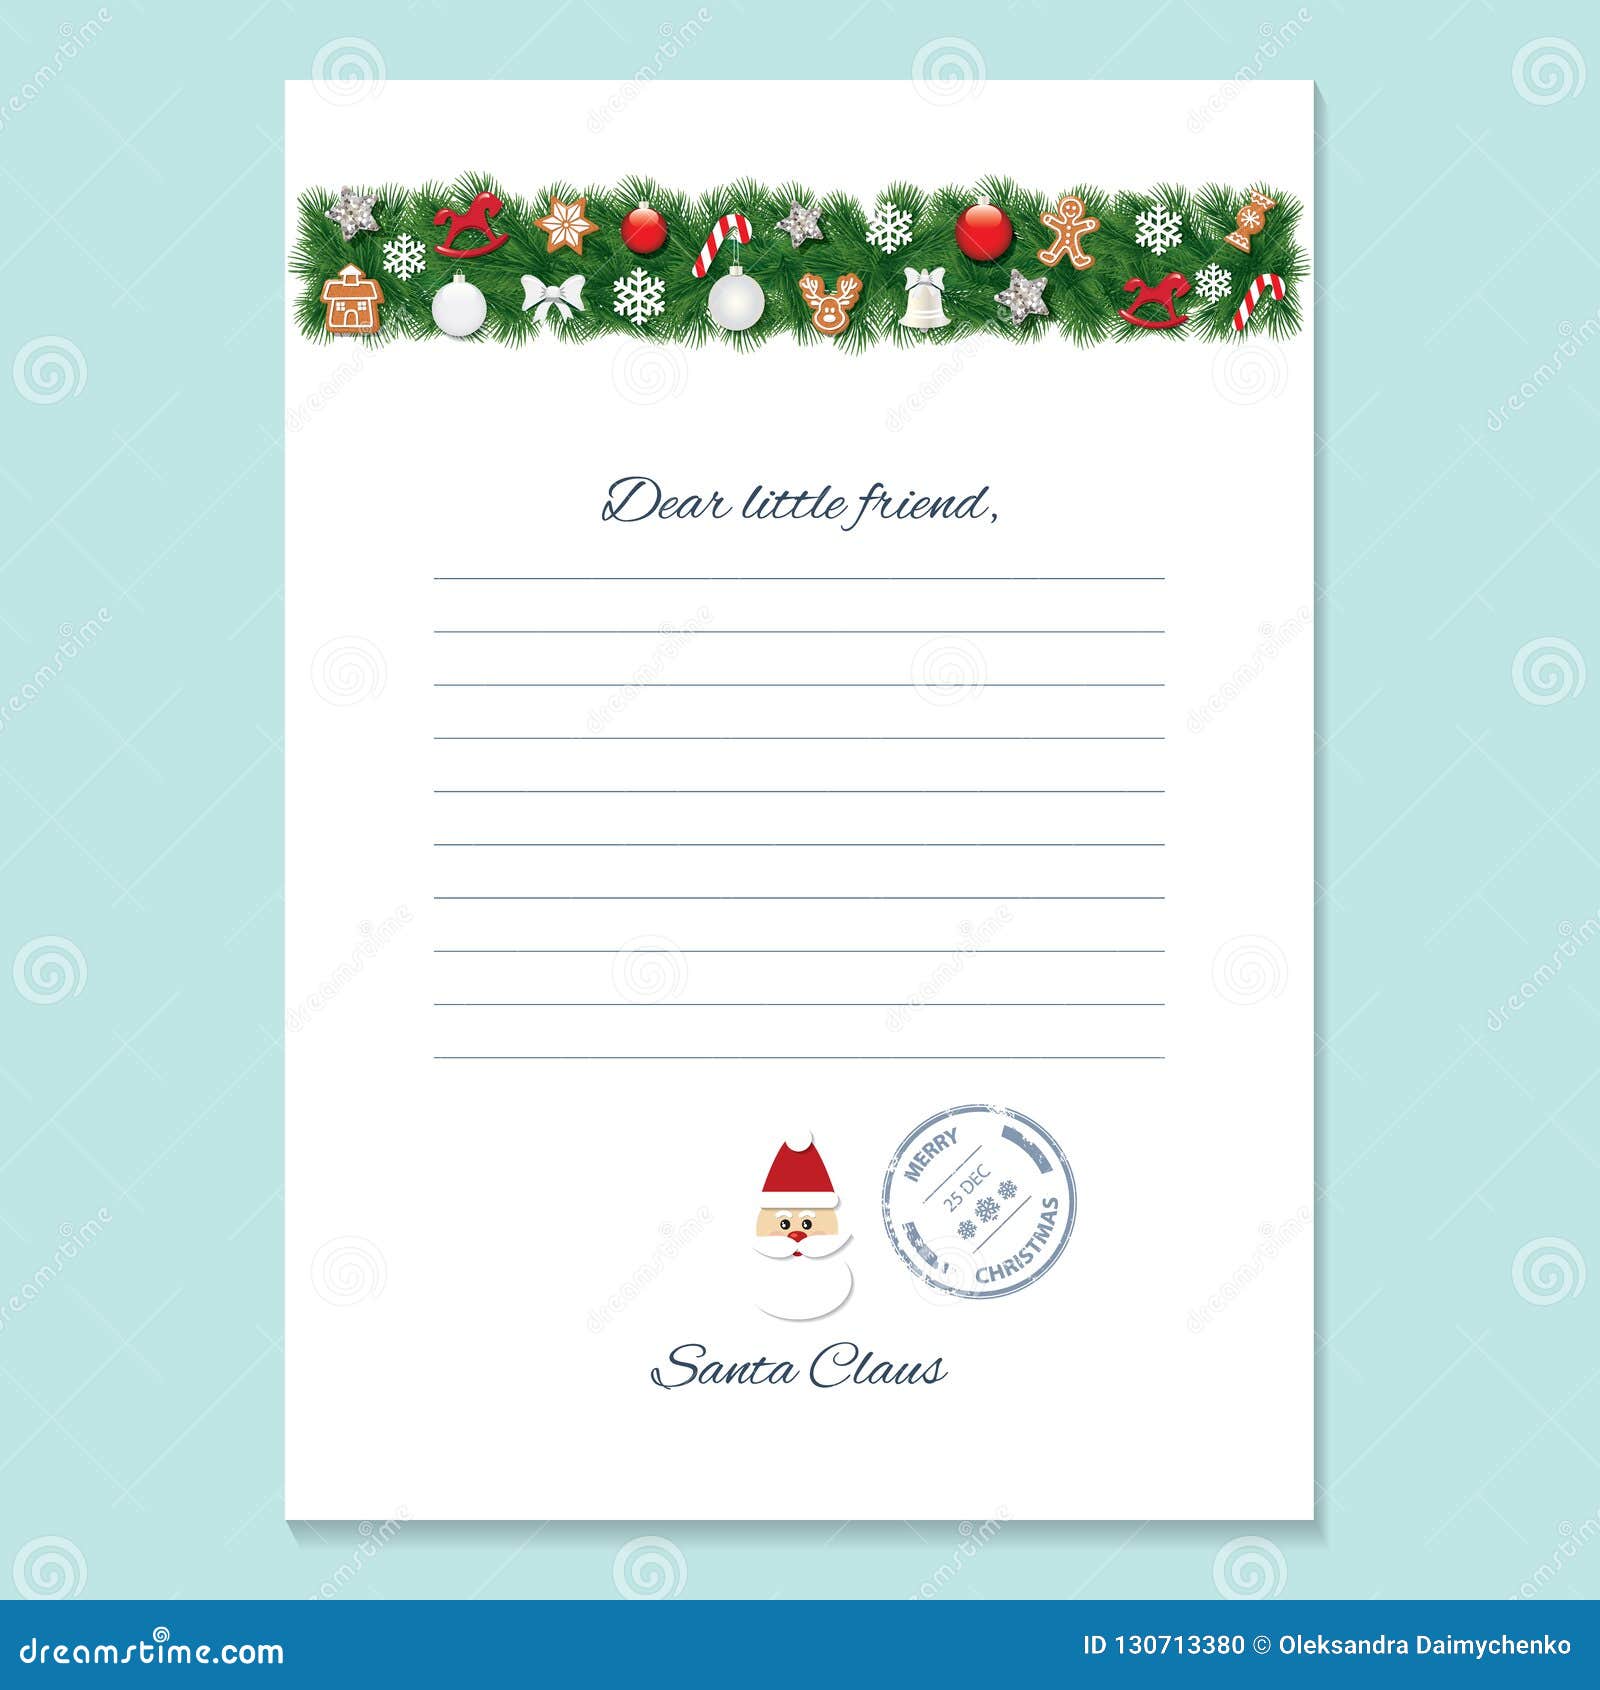 Santa Claus Letter. Decorative Blank Template A23. Stock Vector With Regard To Blank Letter From Santa Template